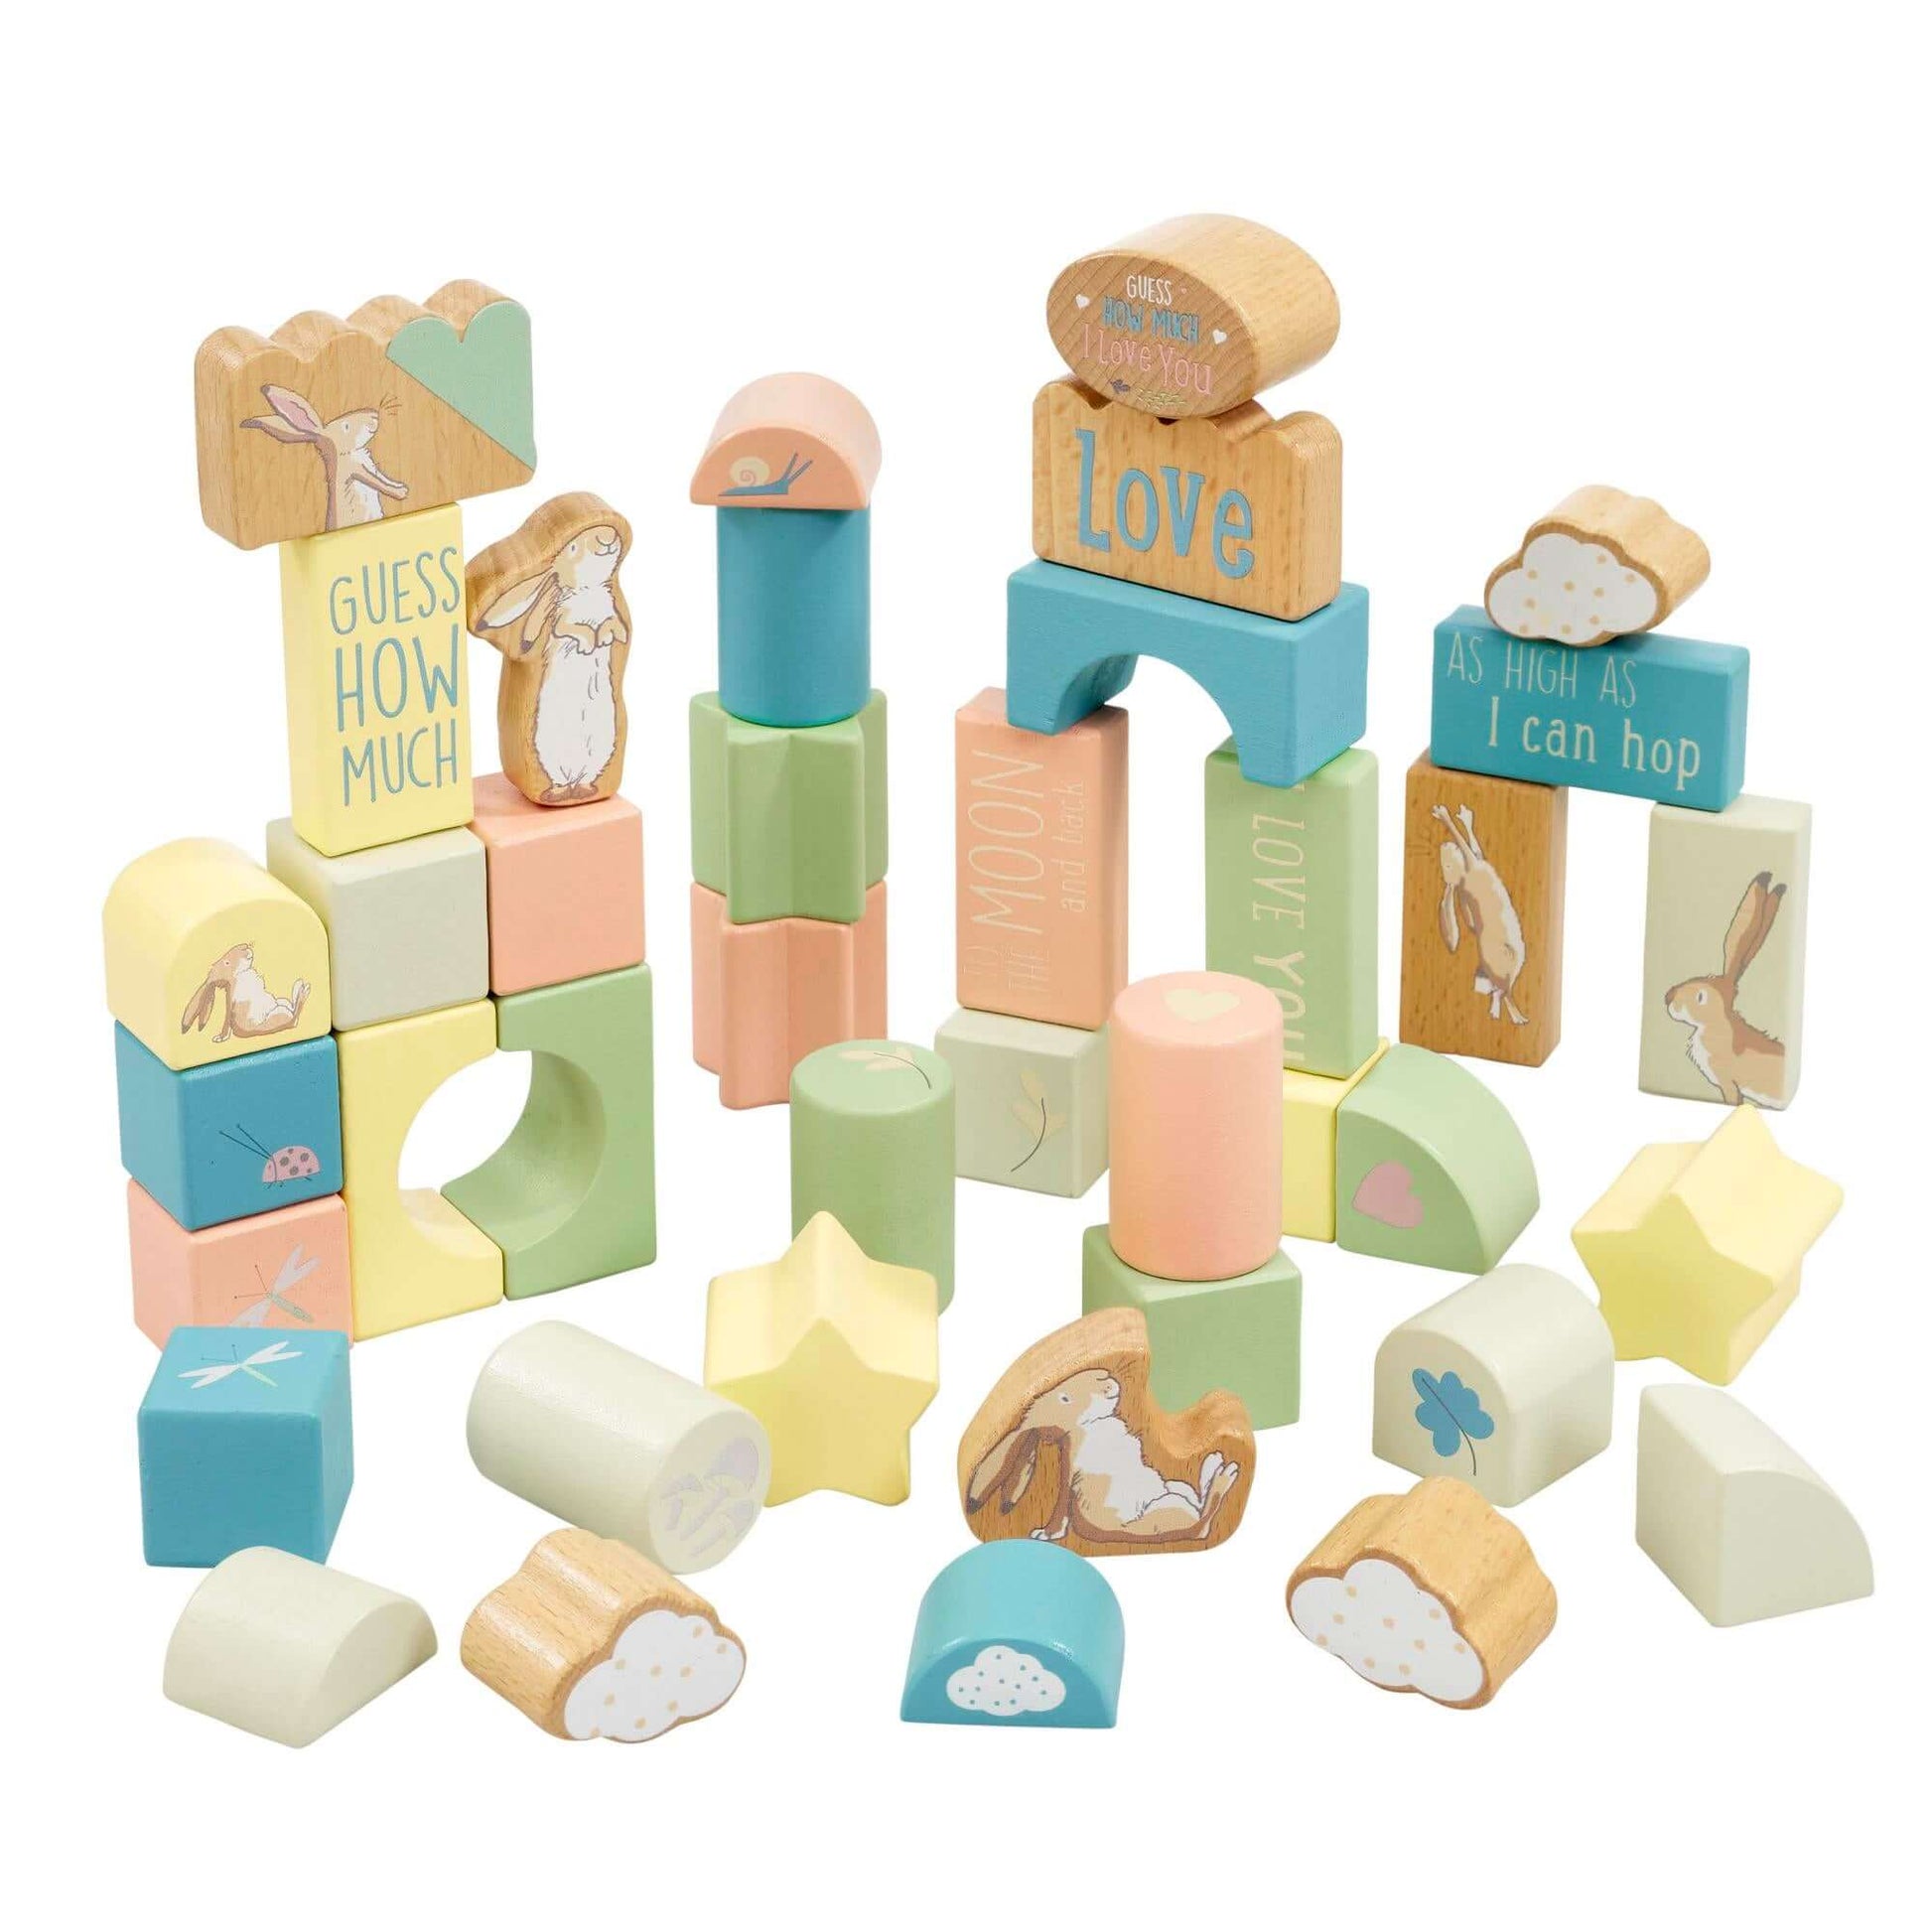 Building Blocks - Wooden - Guess How Much I Love You